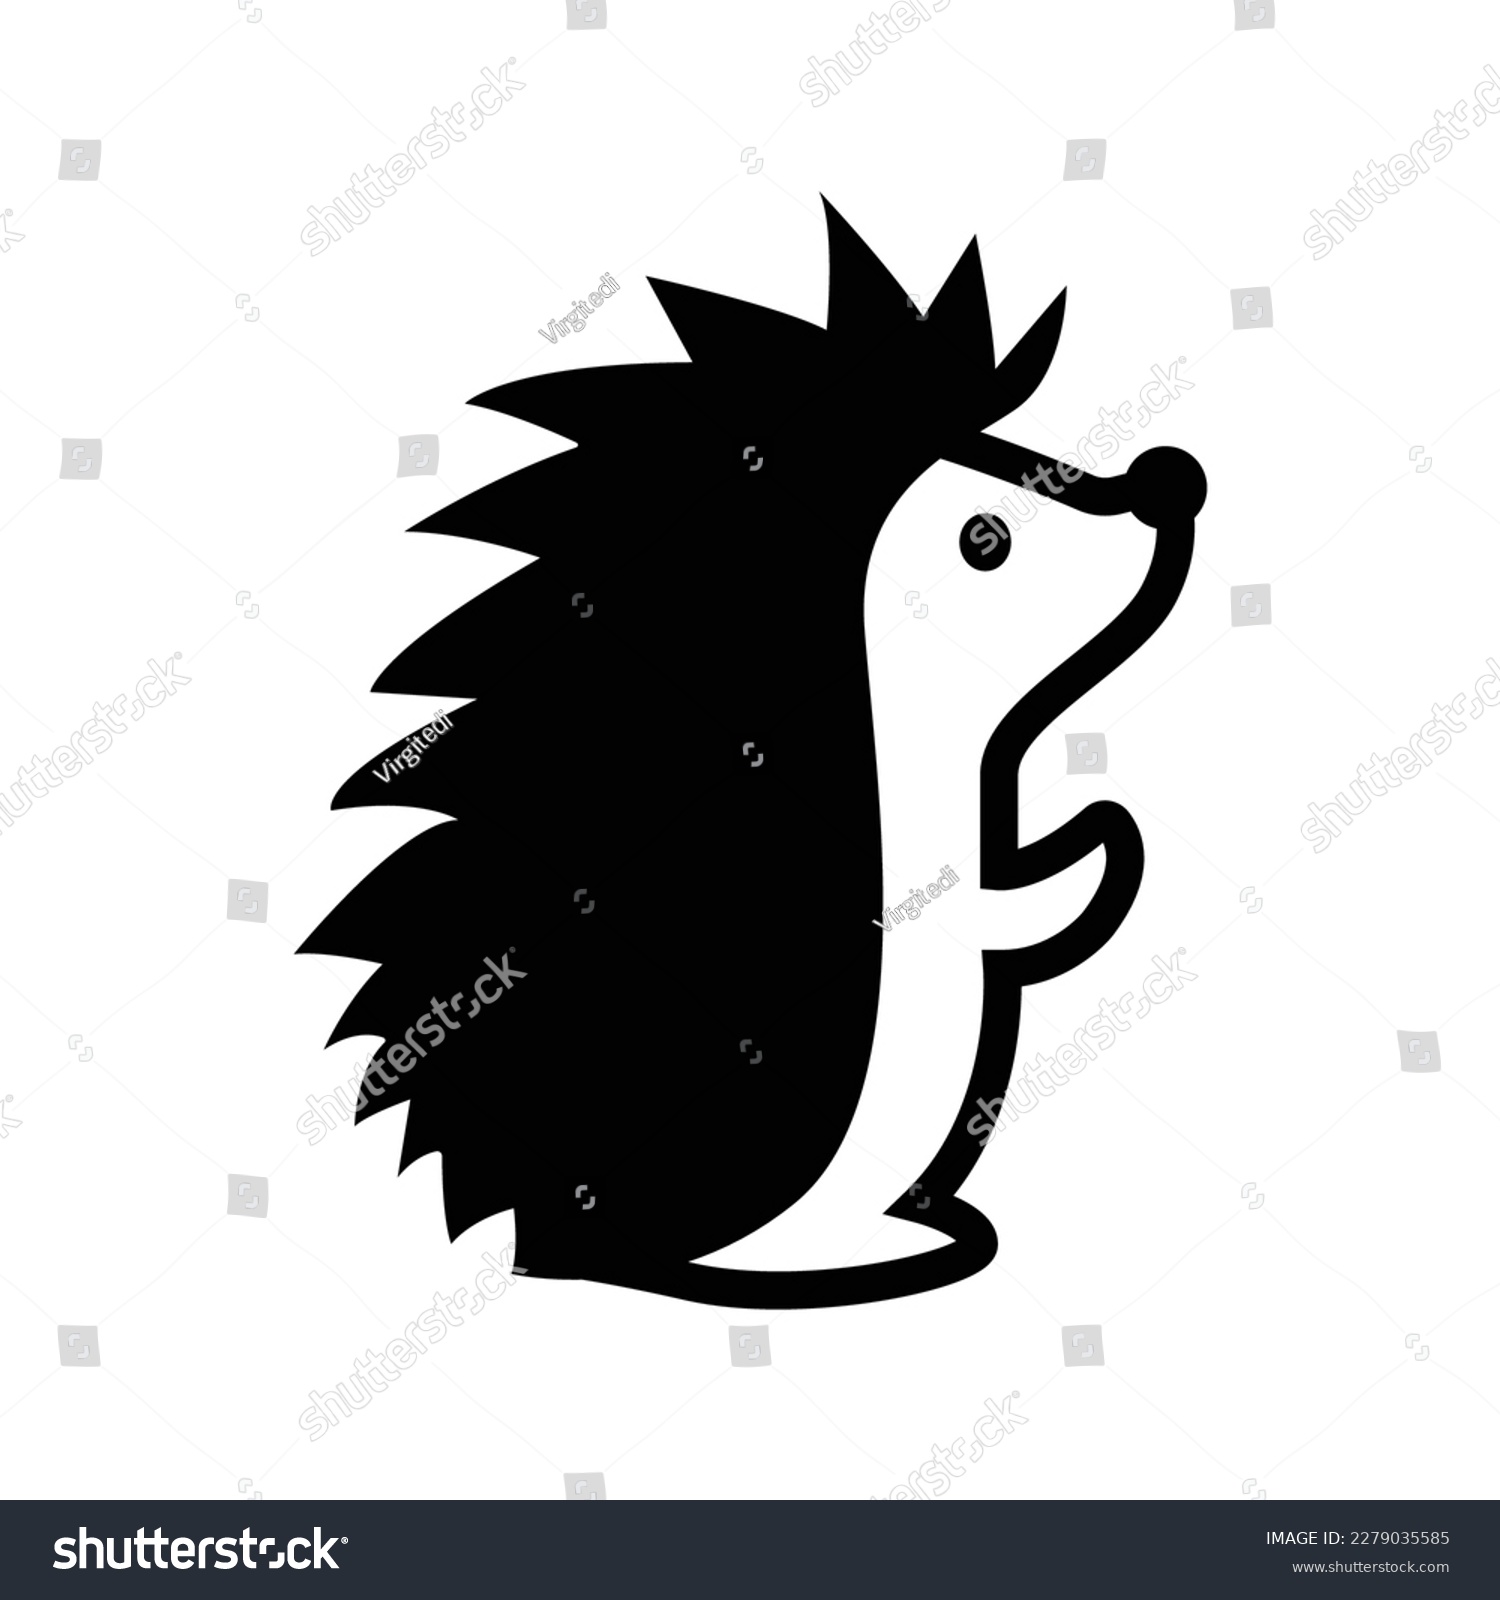 SVG of Mouse icon silhouette mouse illustration svg